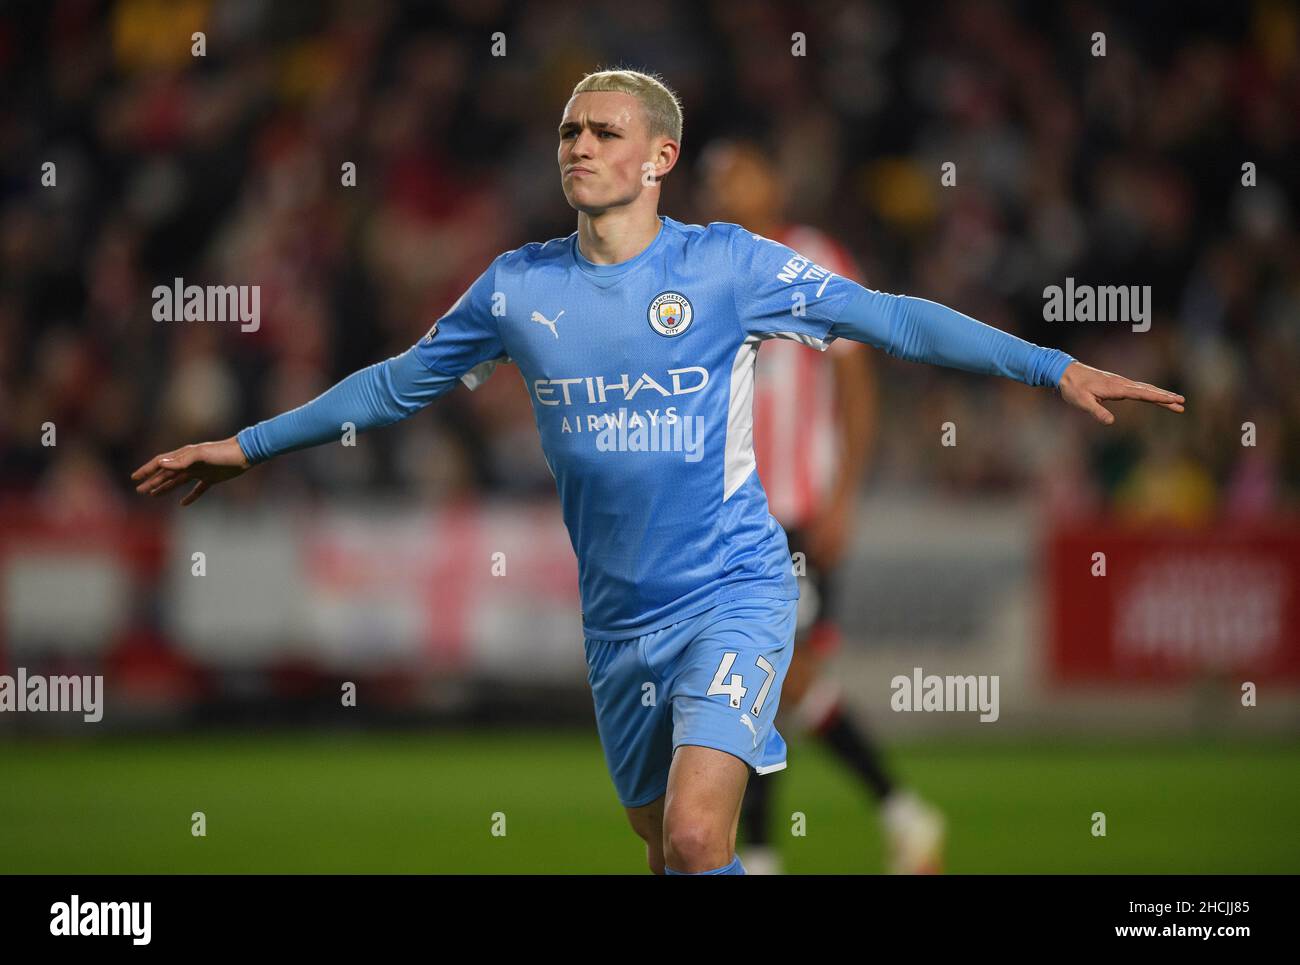 London, UK. 29th Dec, 2021. Phil Foden celebrates his goal during the Premier League match at the Brentford Community Stadium. Credit: Mark Pain/Alamy Live News Stock Photo